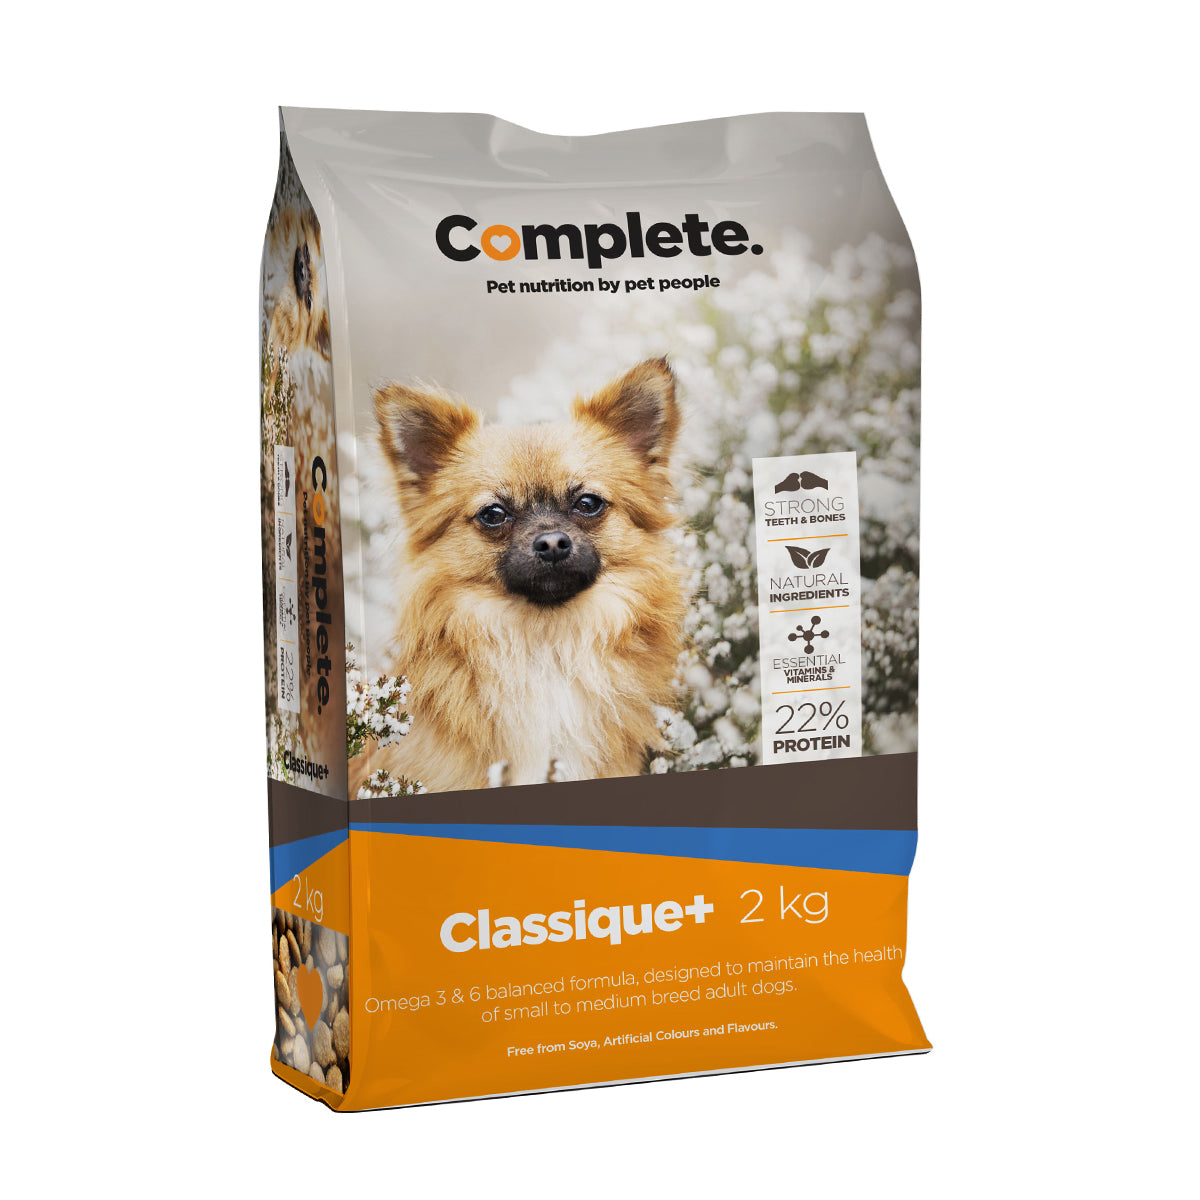 Complete Classique Small/Med Breed 2kg